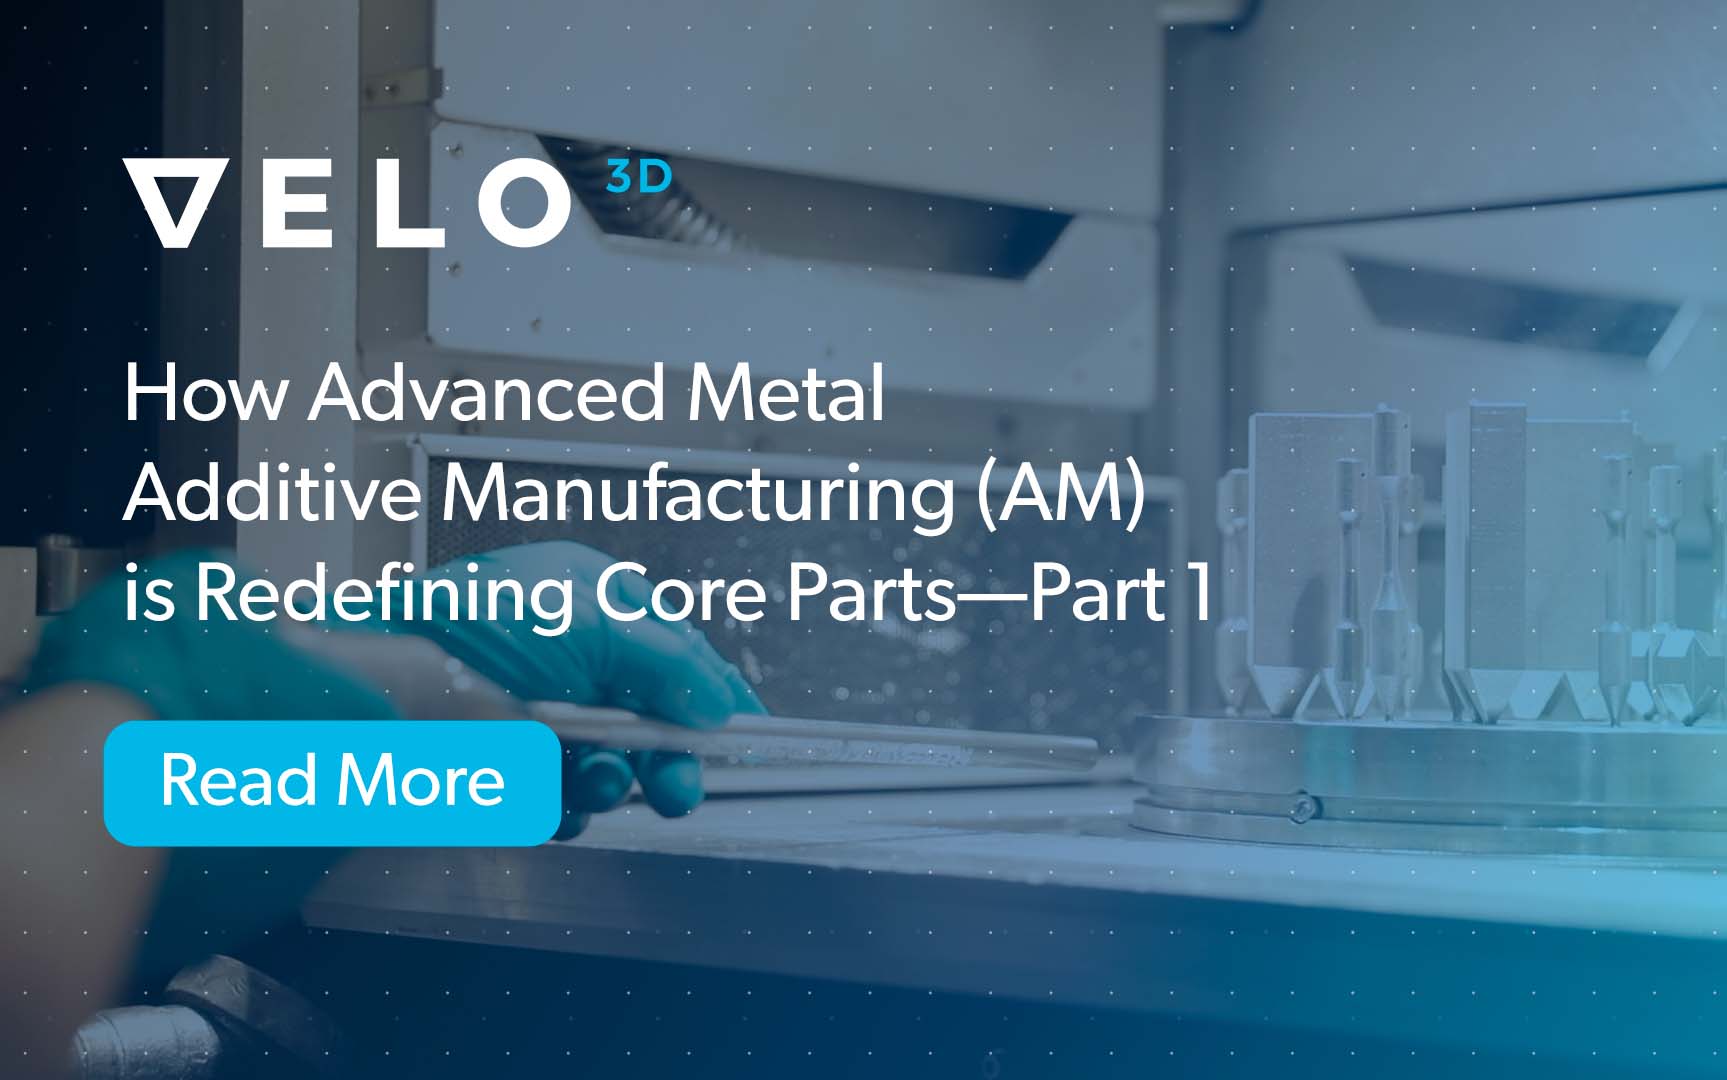 How Advanced Metal Additive Manufacturing (AM) is Redefining Core Parts—Part 1